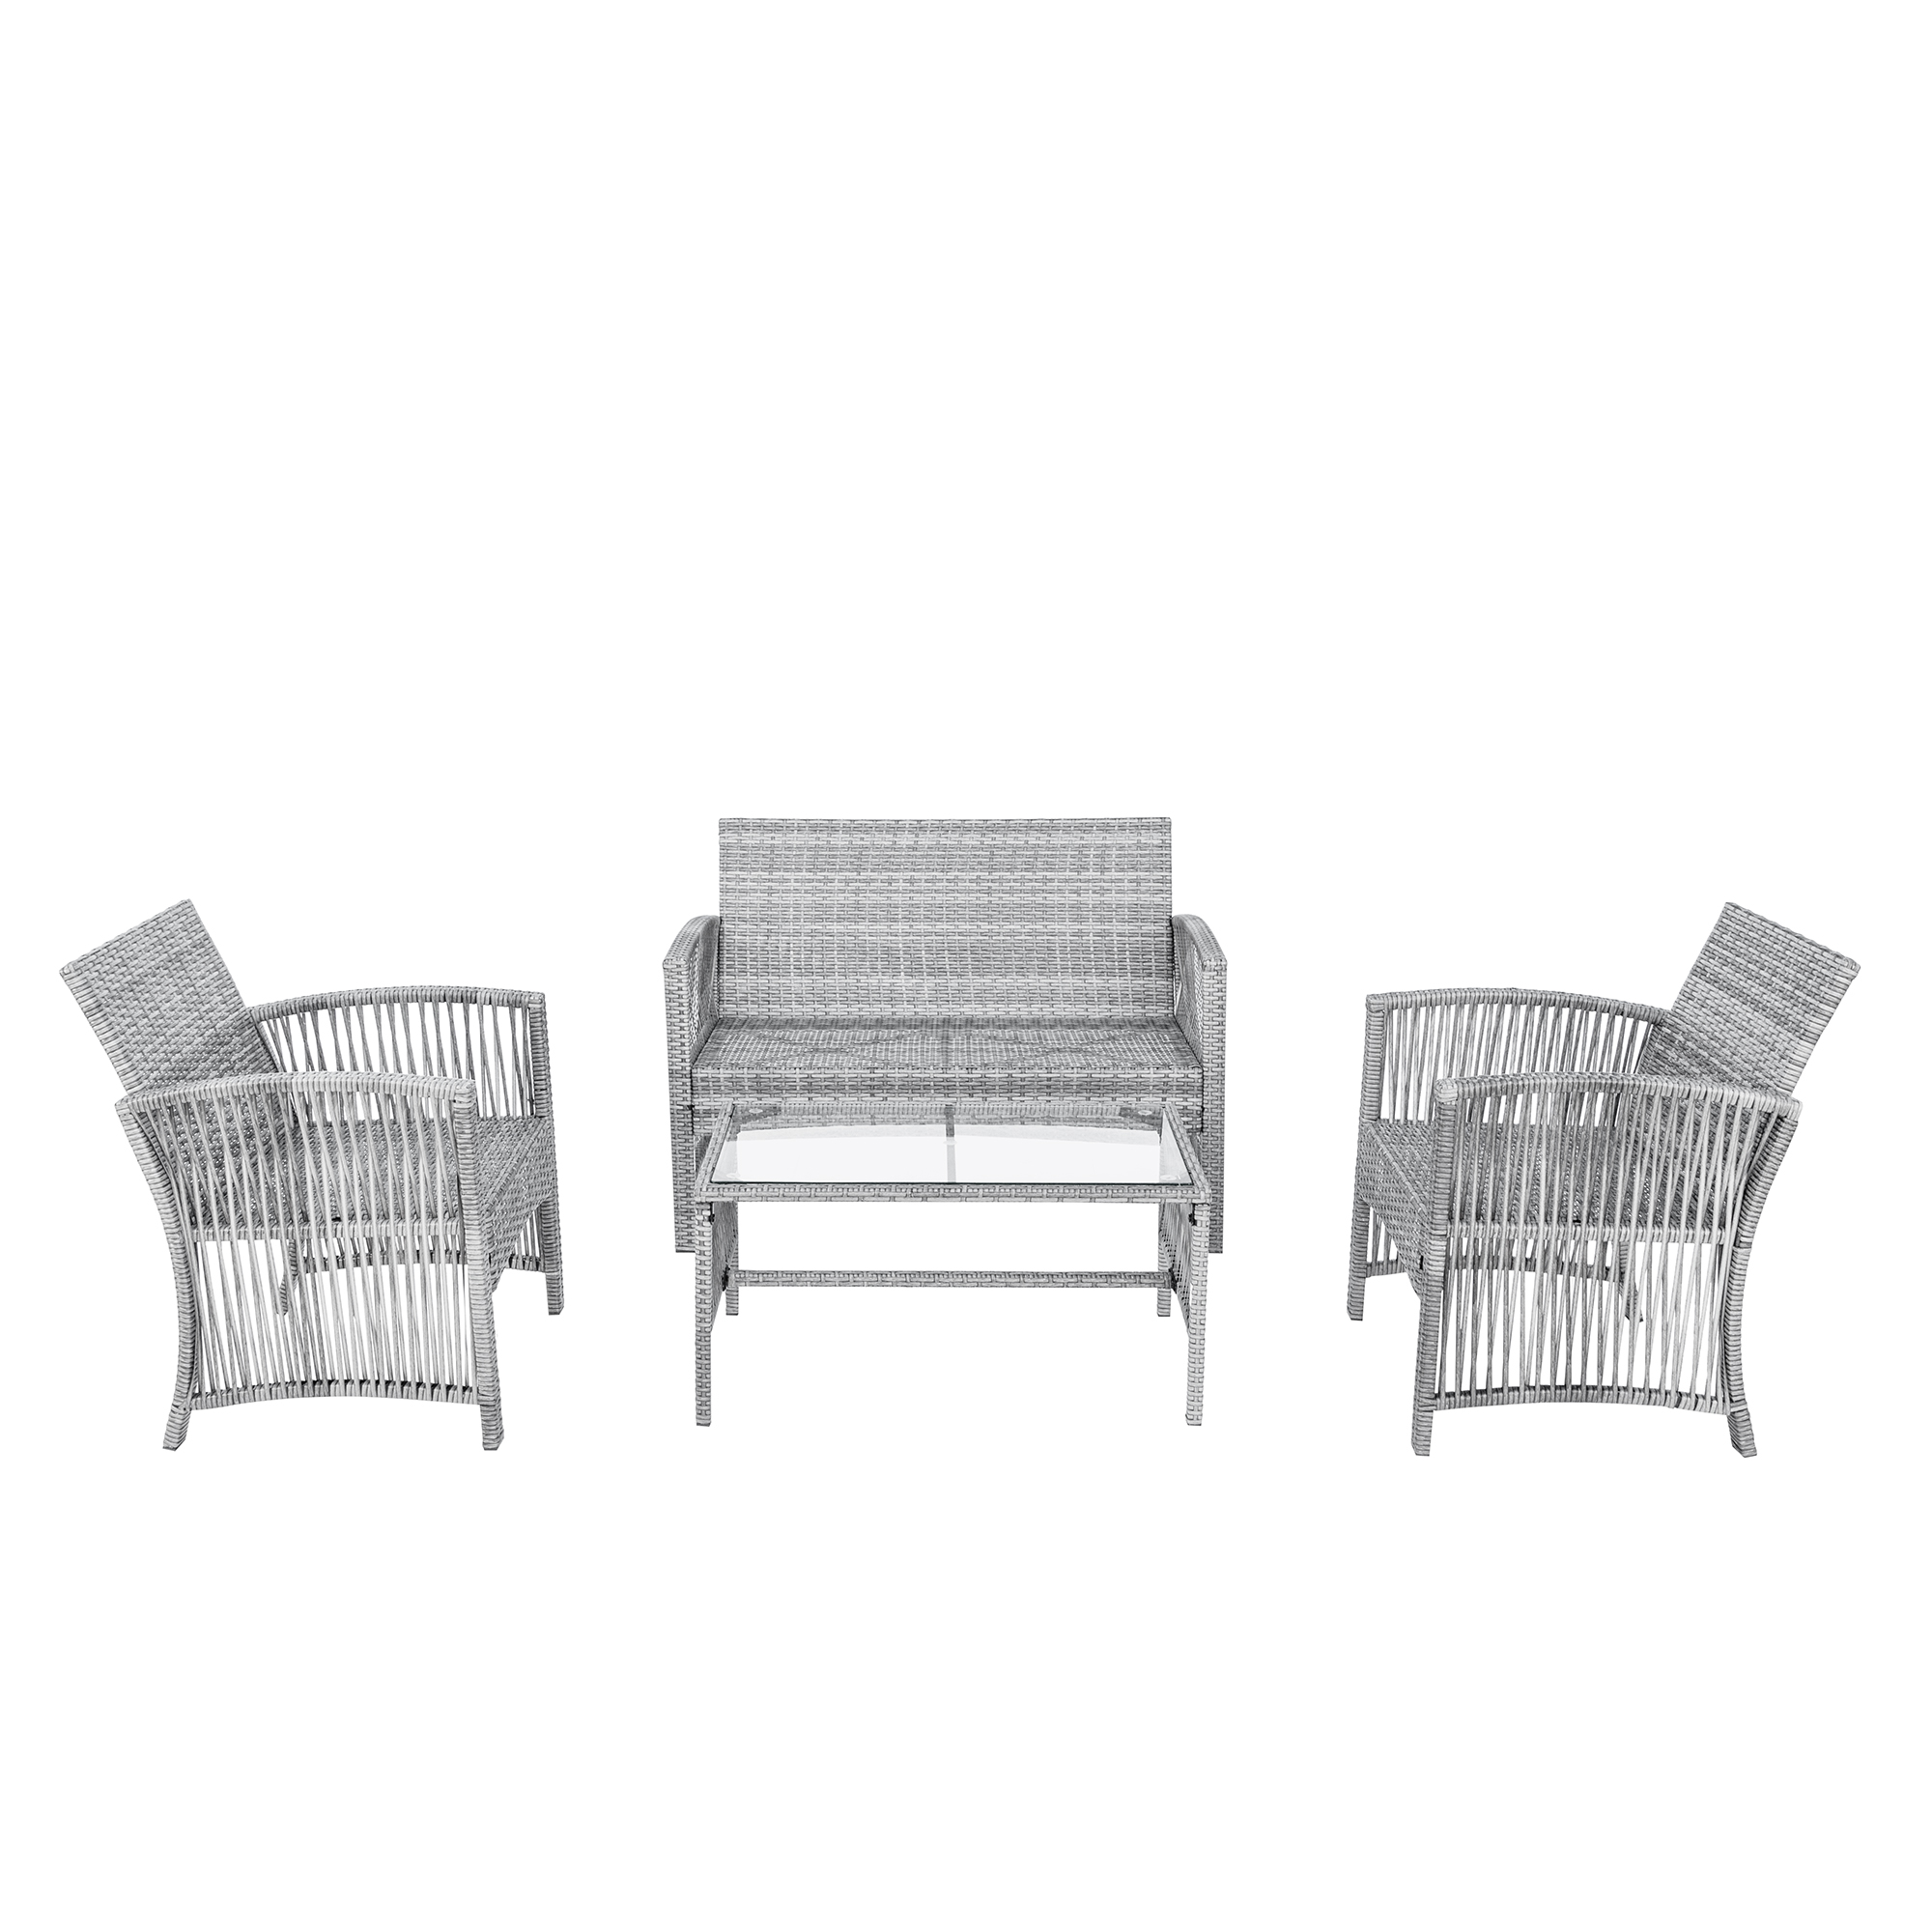 Rattan Patio Furniture Sets Clearance, 4 Piece Outdoor Conversation Sets, Wicker Bar Set with 2 Arm Chairs,1 Loveseat & Coffee Table, Patio Dining Sets for Backyard Porch Poolside Garden, Gray, W7782 - image 5 of 11